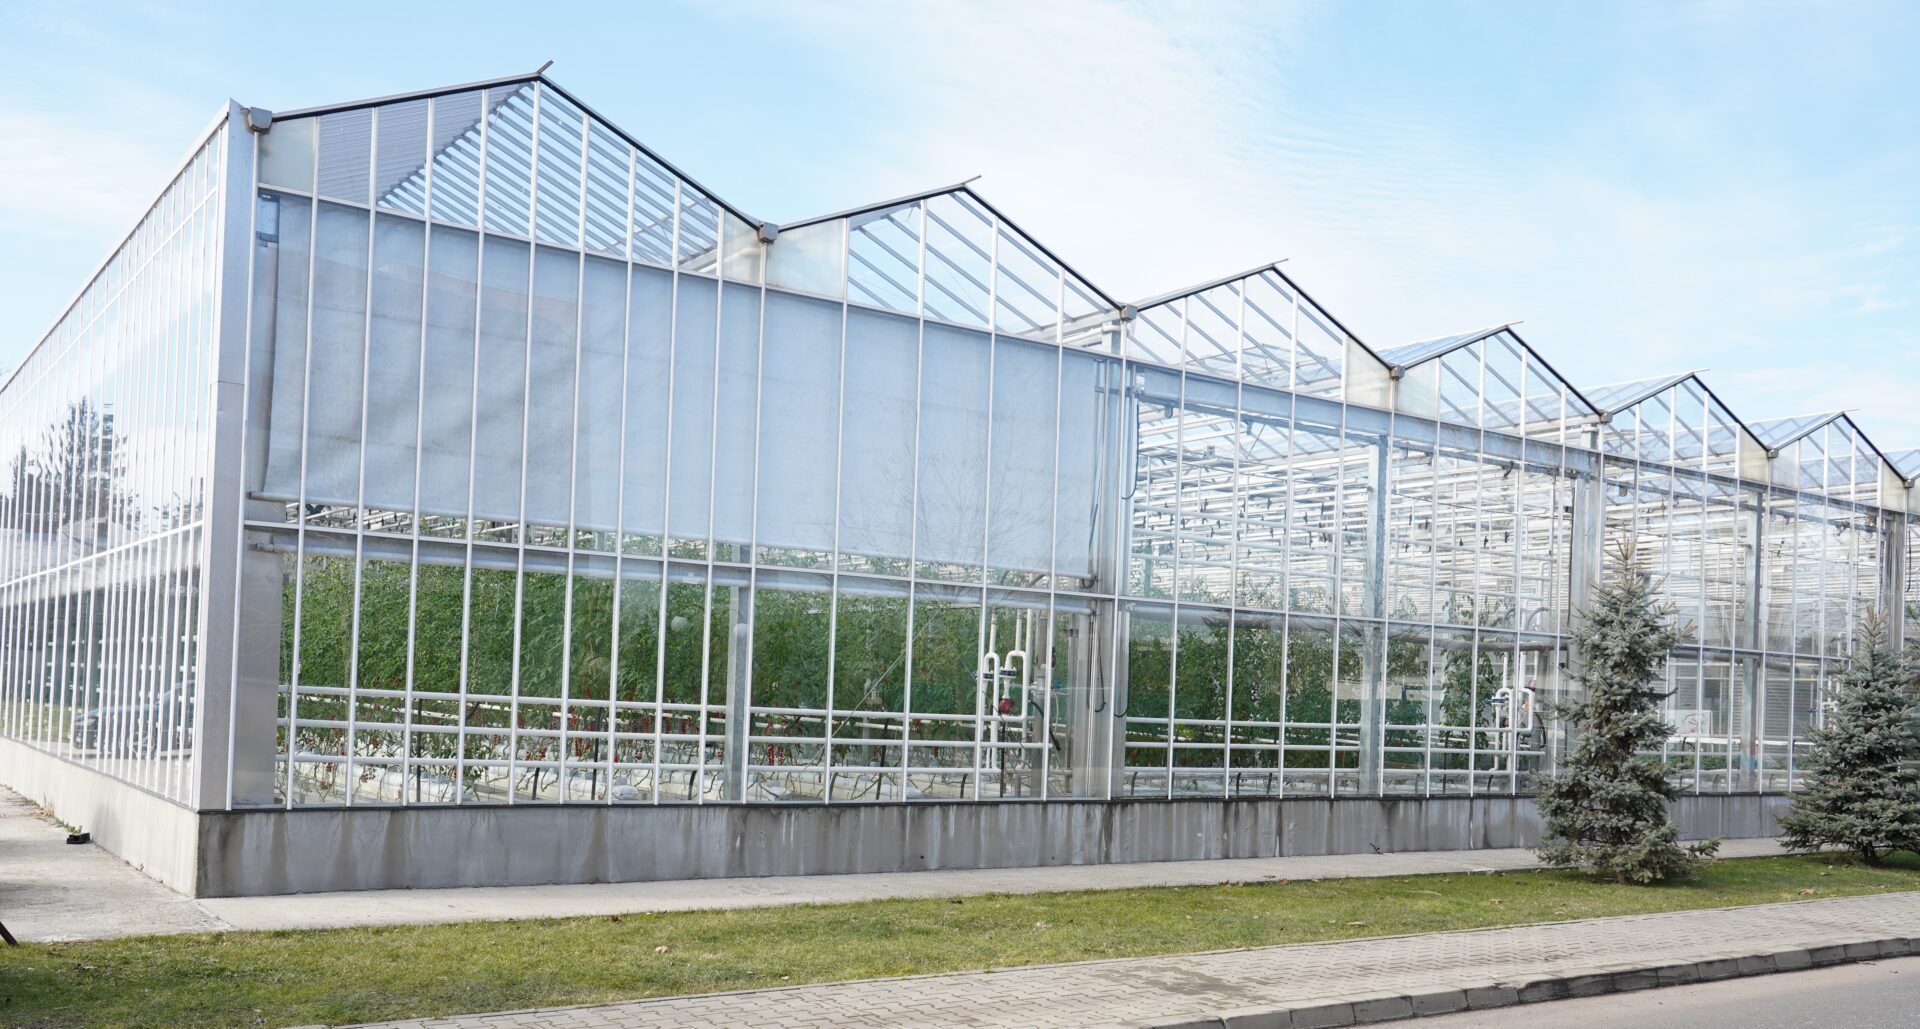 The research greenhouse at the University of Agronomic Sciences and Veterinary Medicine of Bucharest (USAMV), Romania